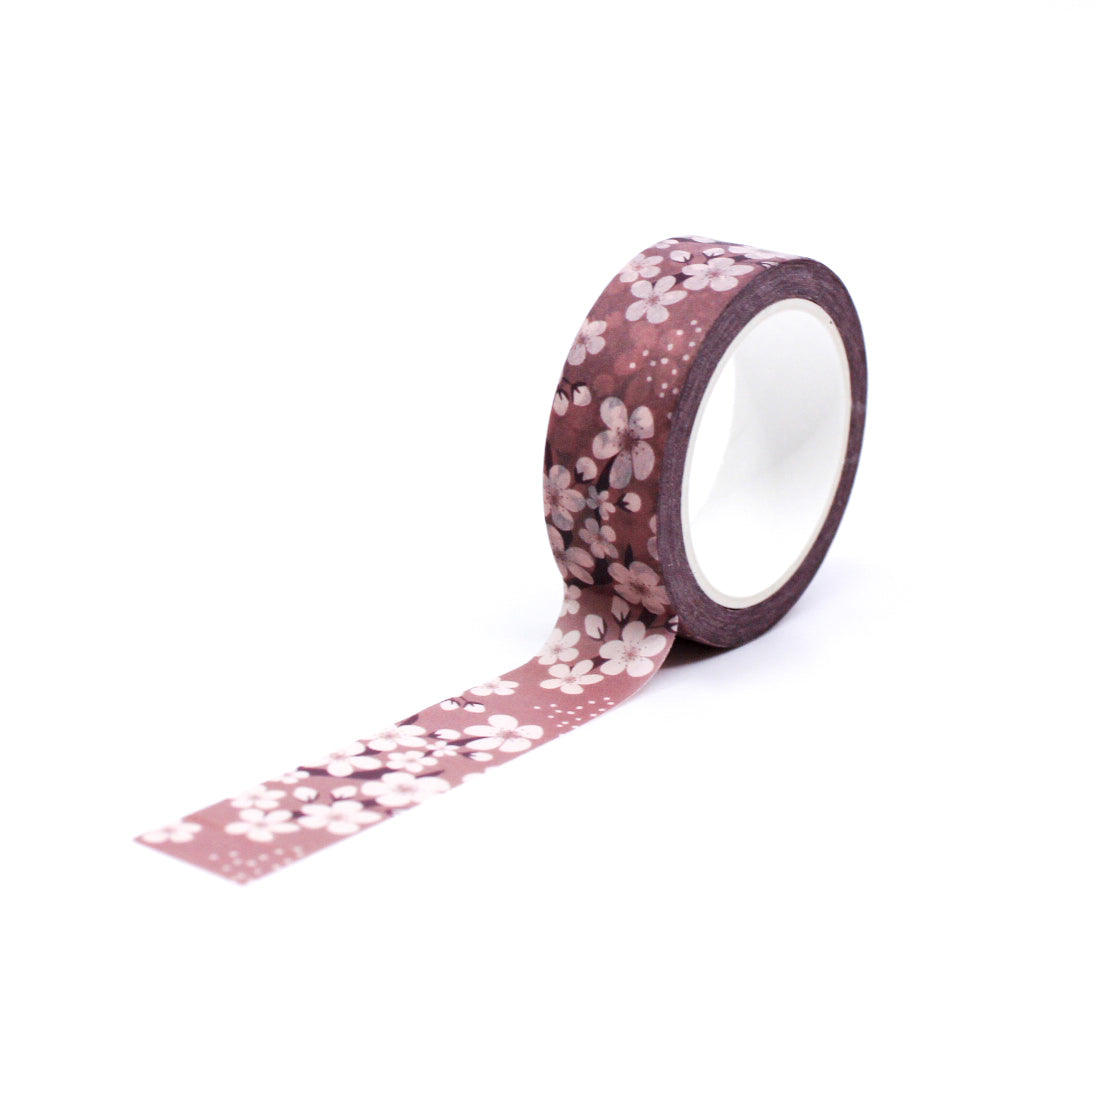 Pink Cherry Blossoms Washi Tape featuring delicate pink cherry blossom motifs, perfect for adding a touch of elegance and charm to your crafts and designs. This tape is from Maylay co. and sold at BBB Supplies Craft Shop.